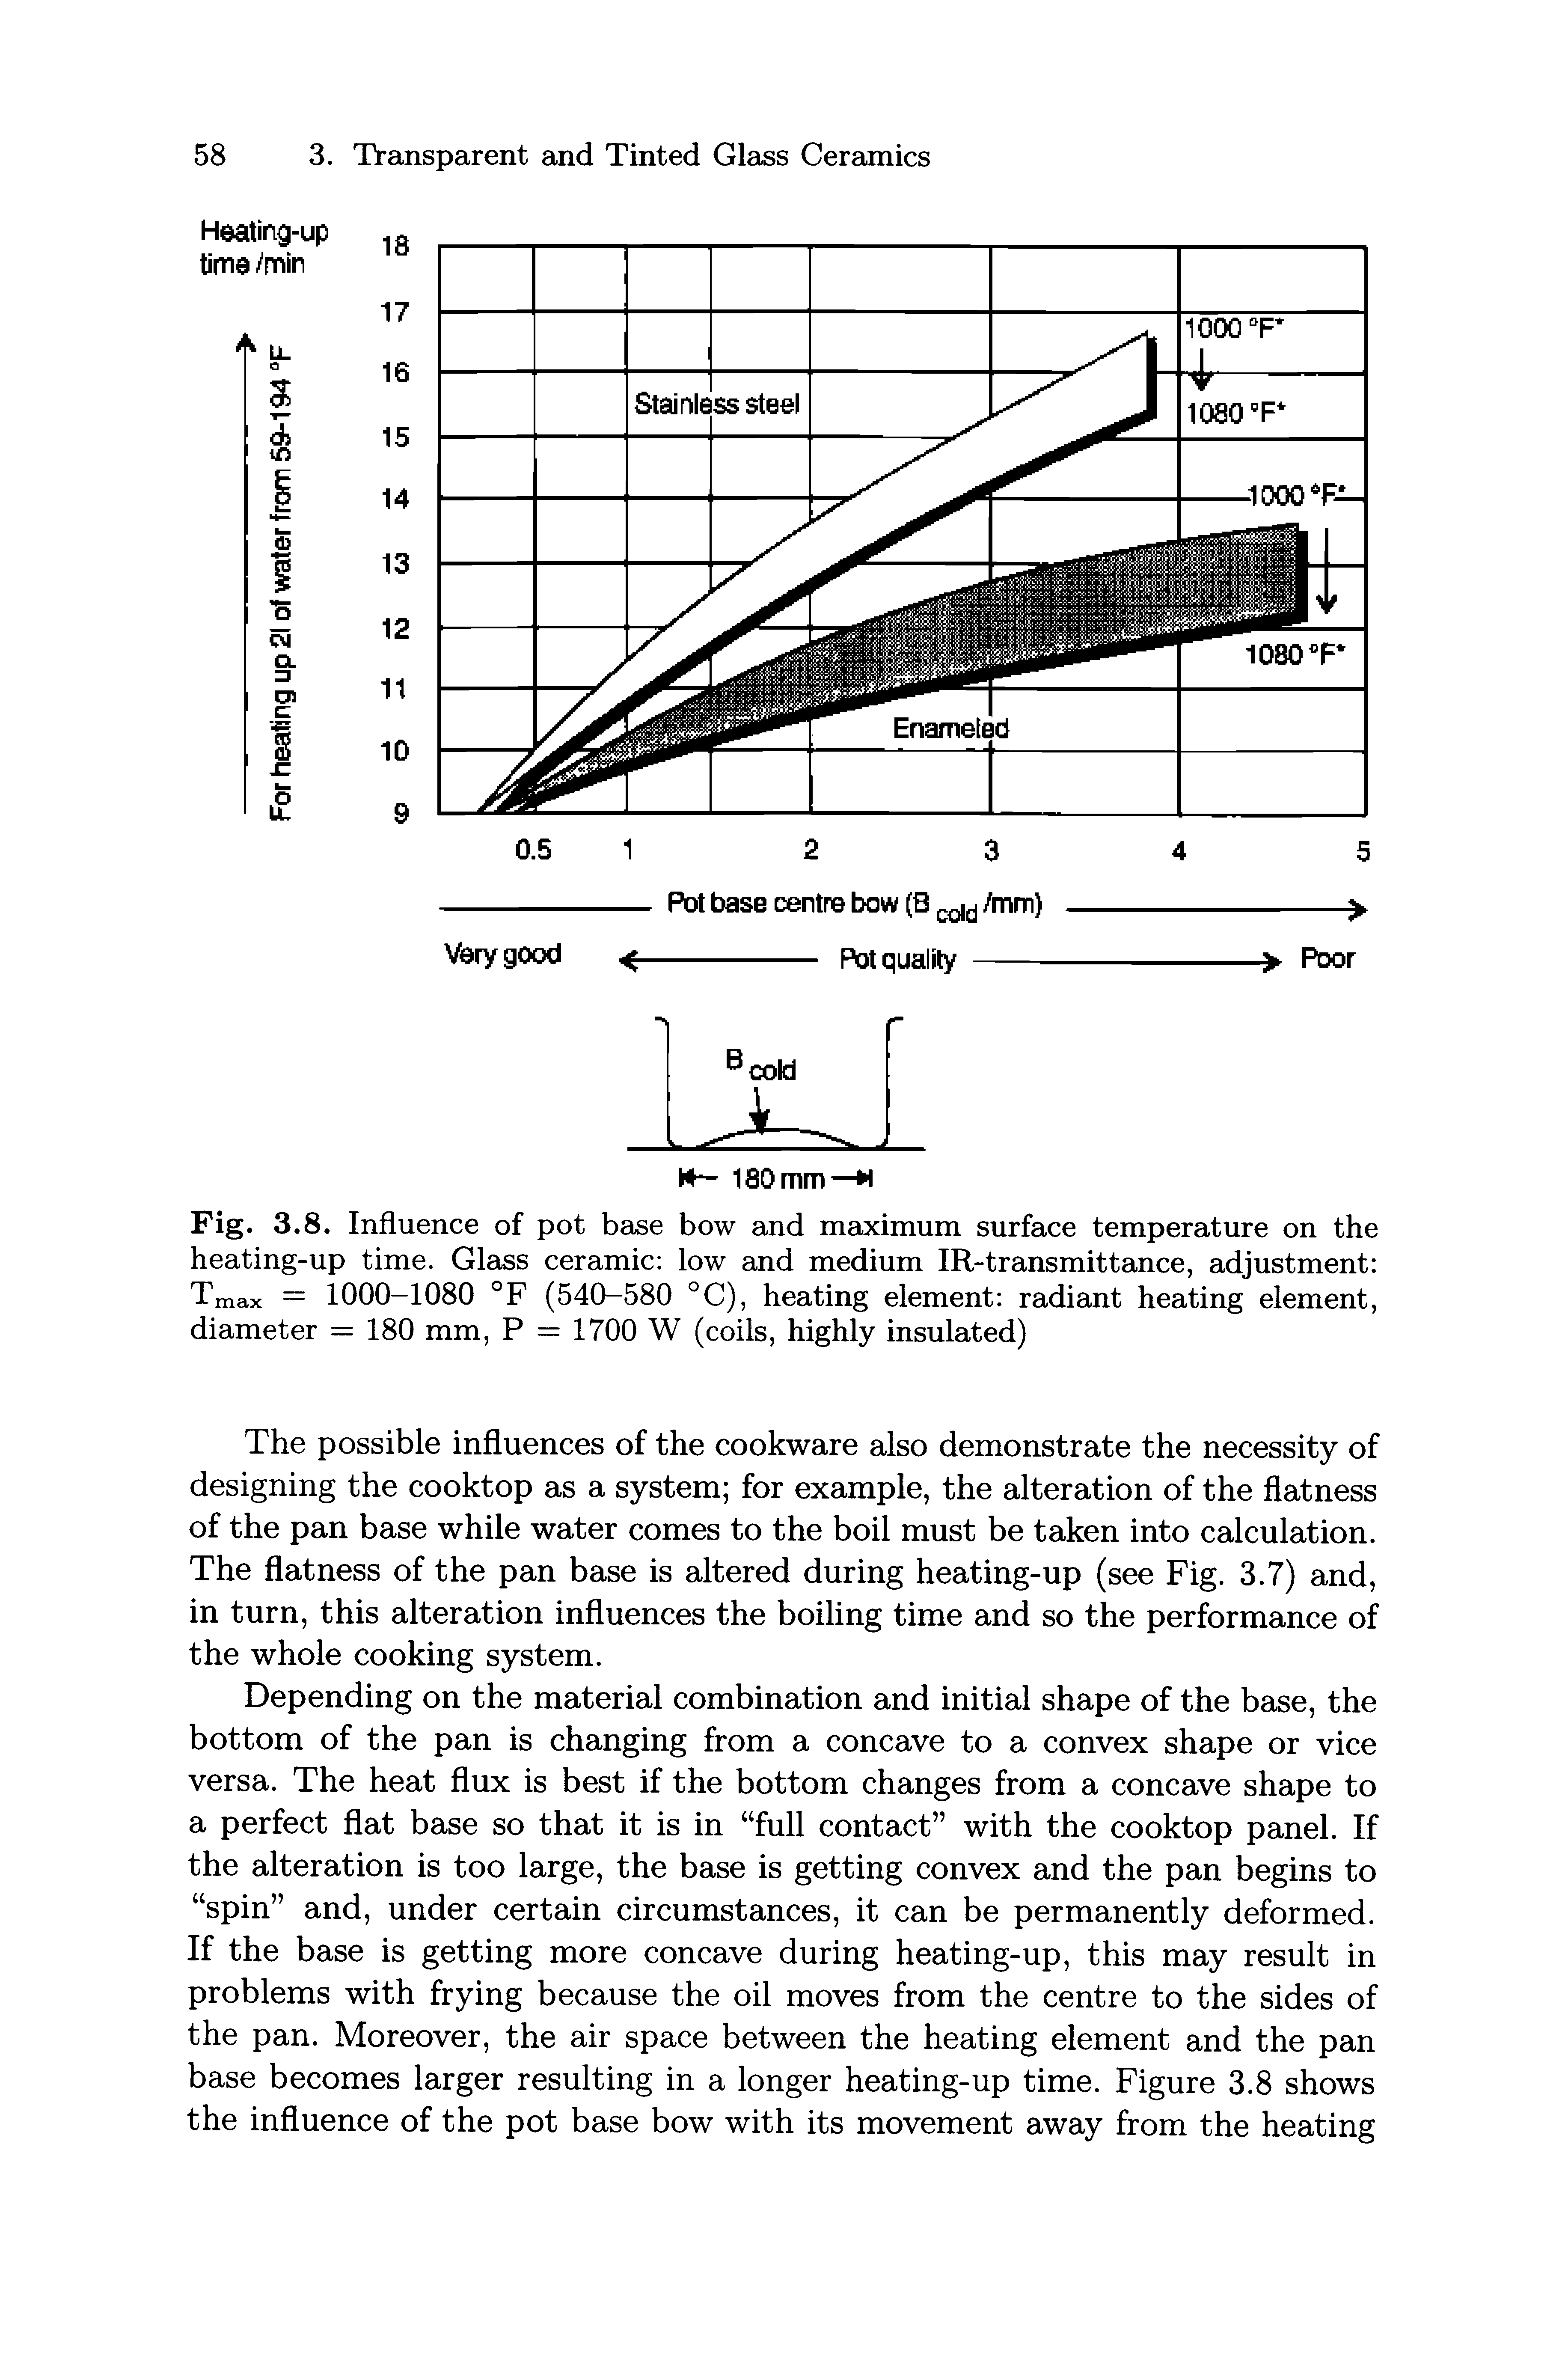 Fig. 3.8. Influence of pot base bow and maximum surface temperature on the heating-up time. Glass ceramic low and medium IR-transmittance, adjustment Tmax = 1000-1080 °F (540-580 °C), heating element radiant heating element, diameter = 180 mm, P = 1700 W (coils, highly insulated)...